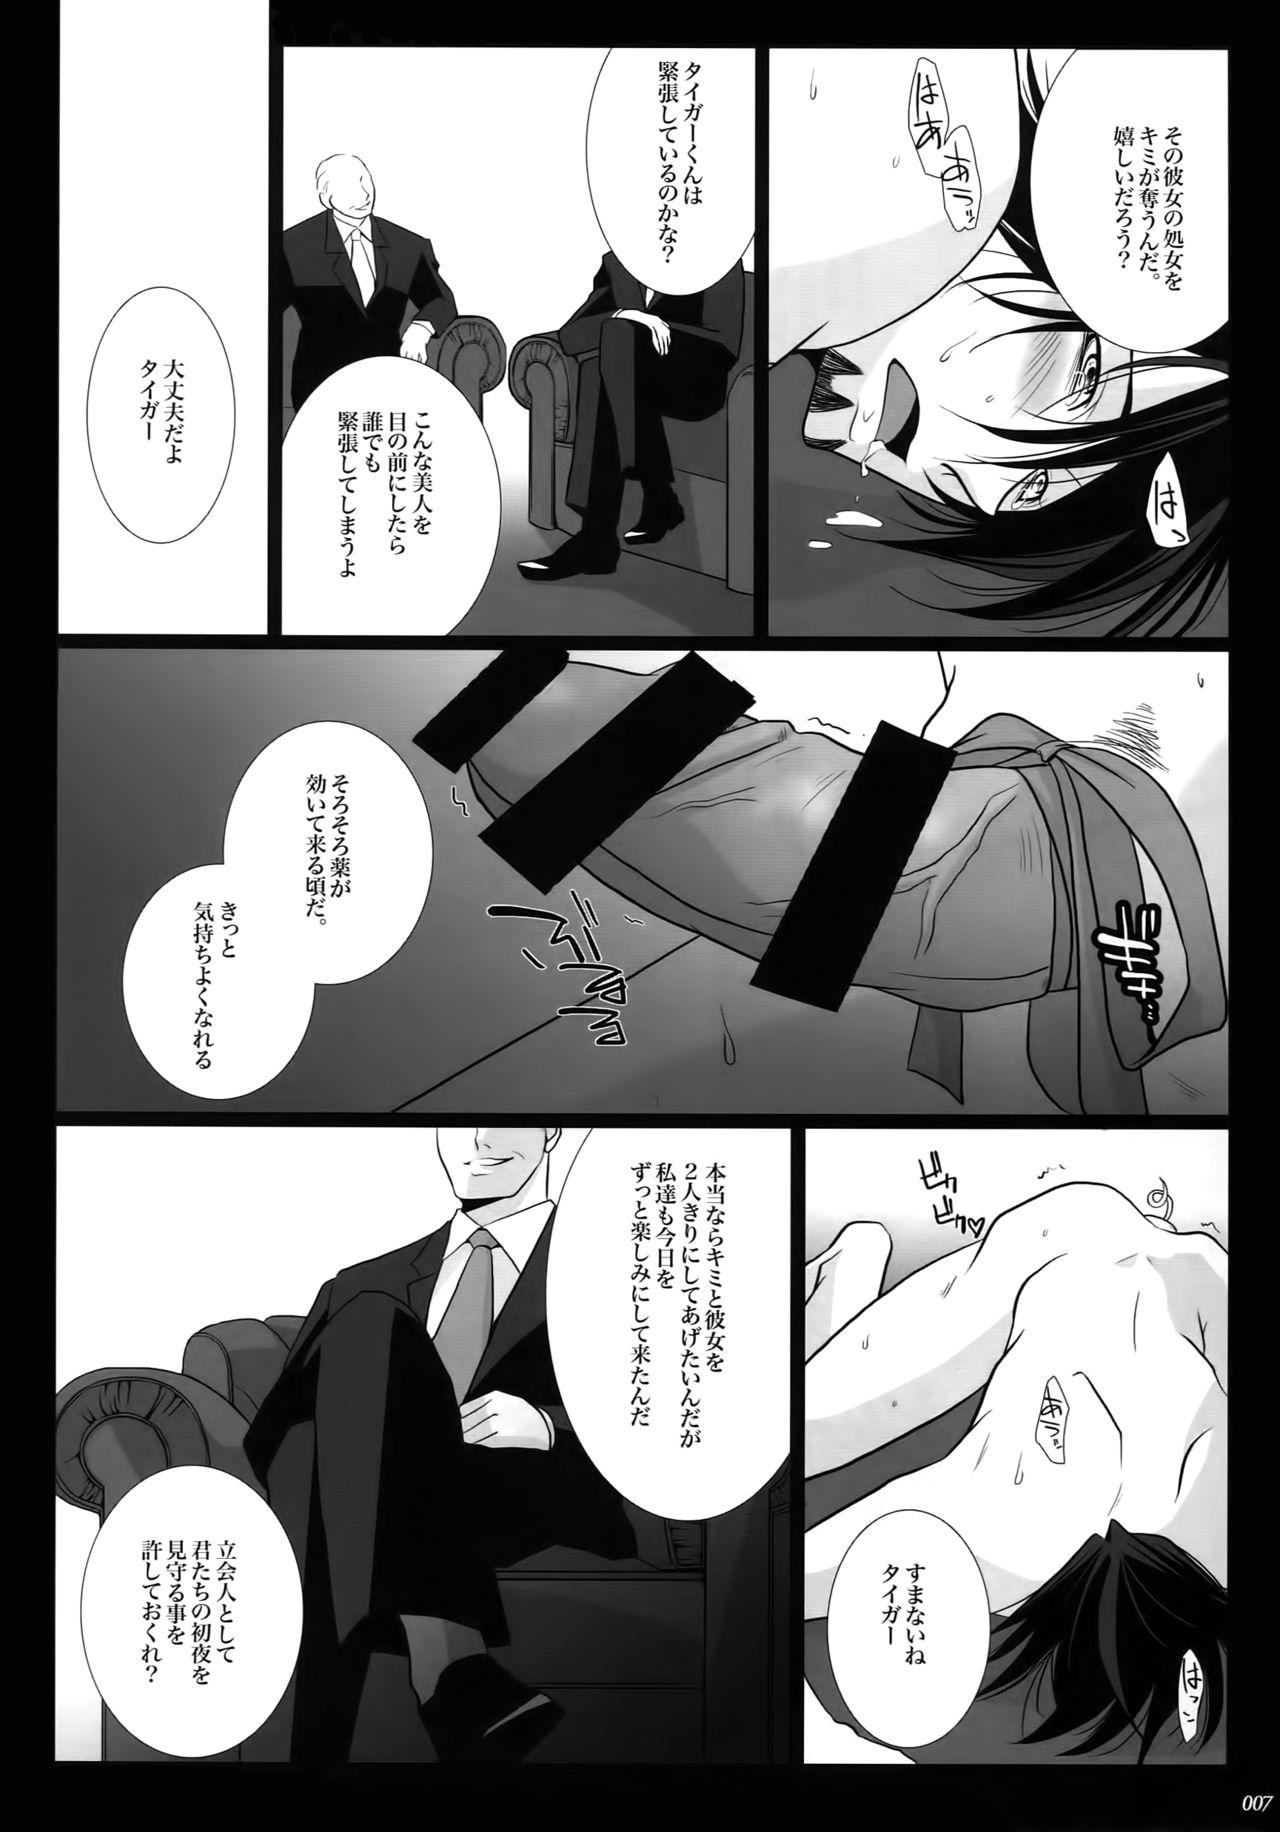 Ghetto mob;Re - Tiger and bunny Sex Tape - Page 6